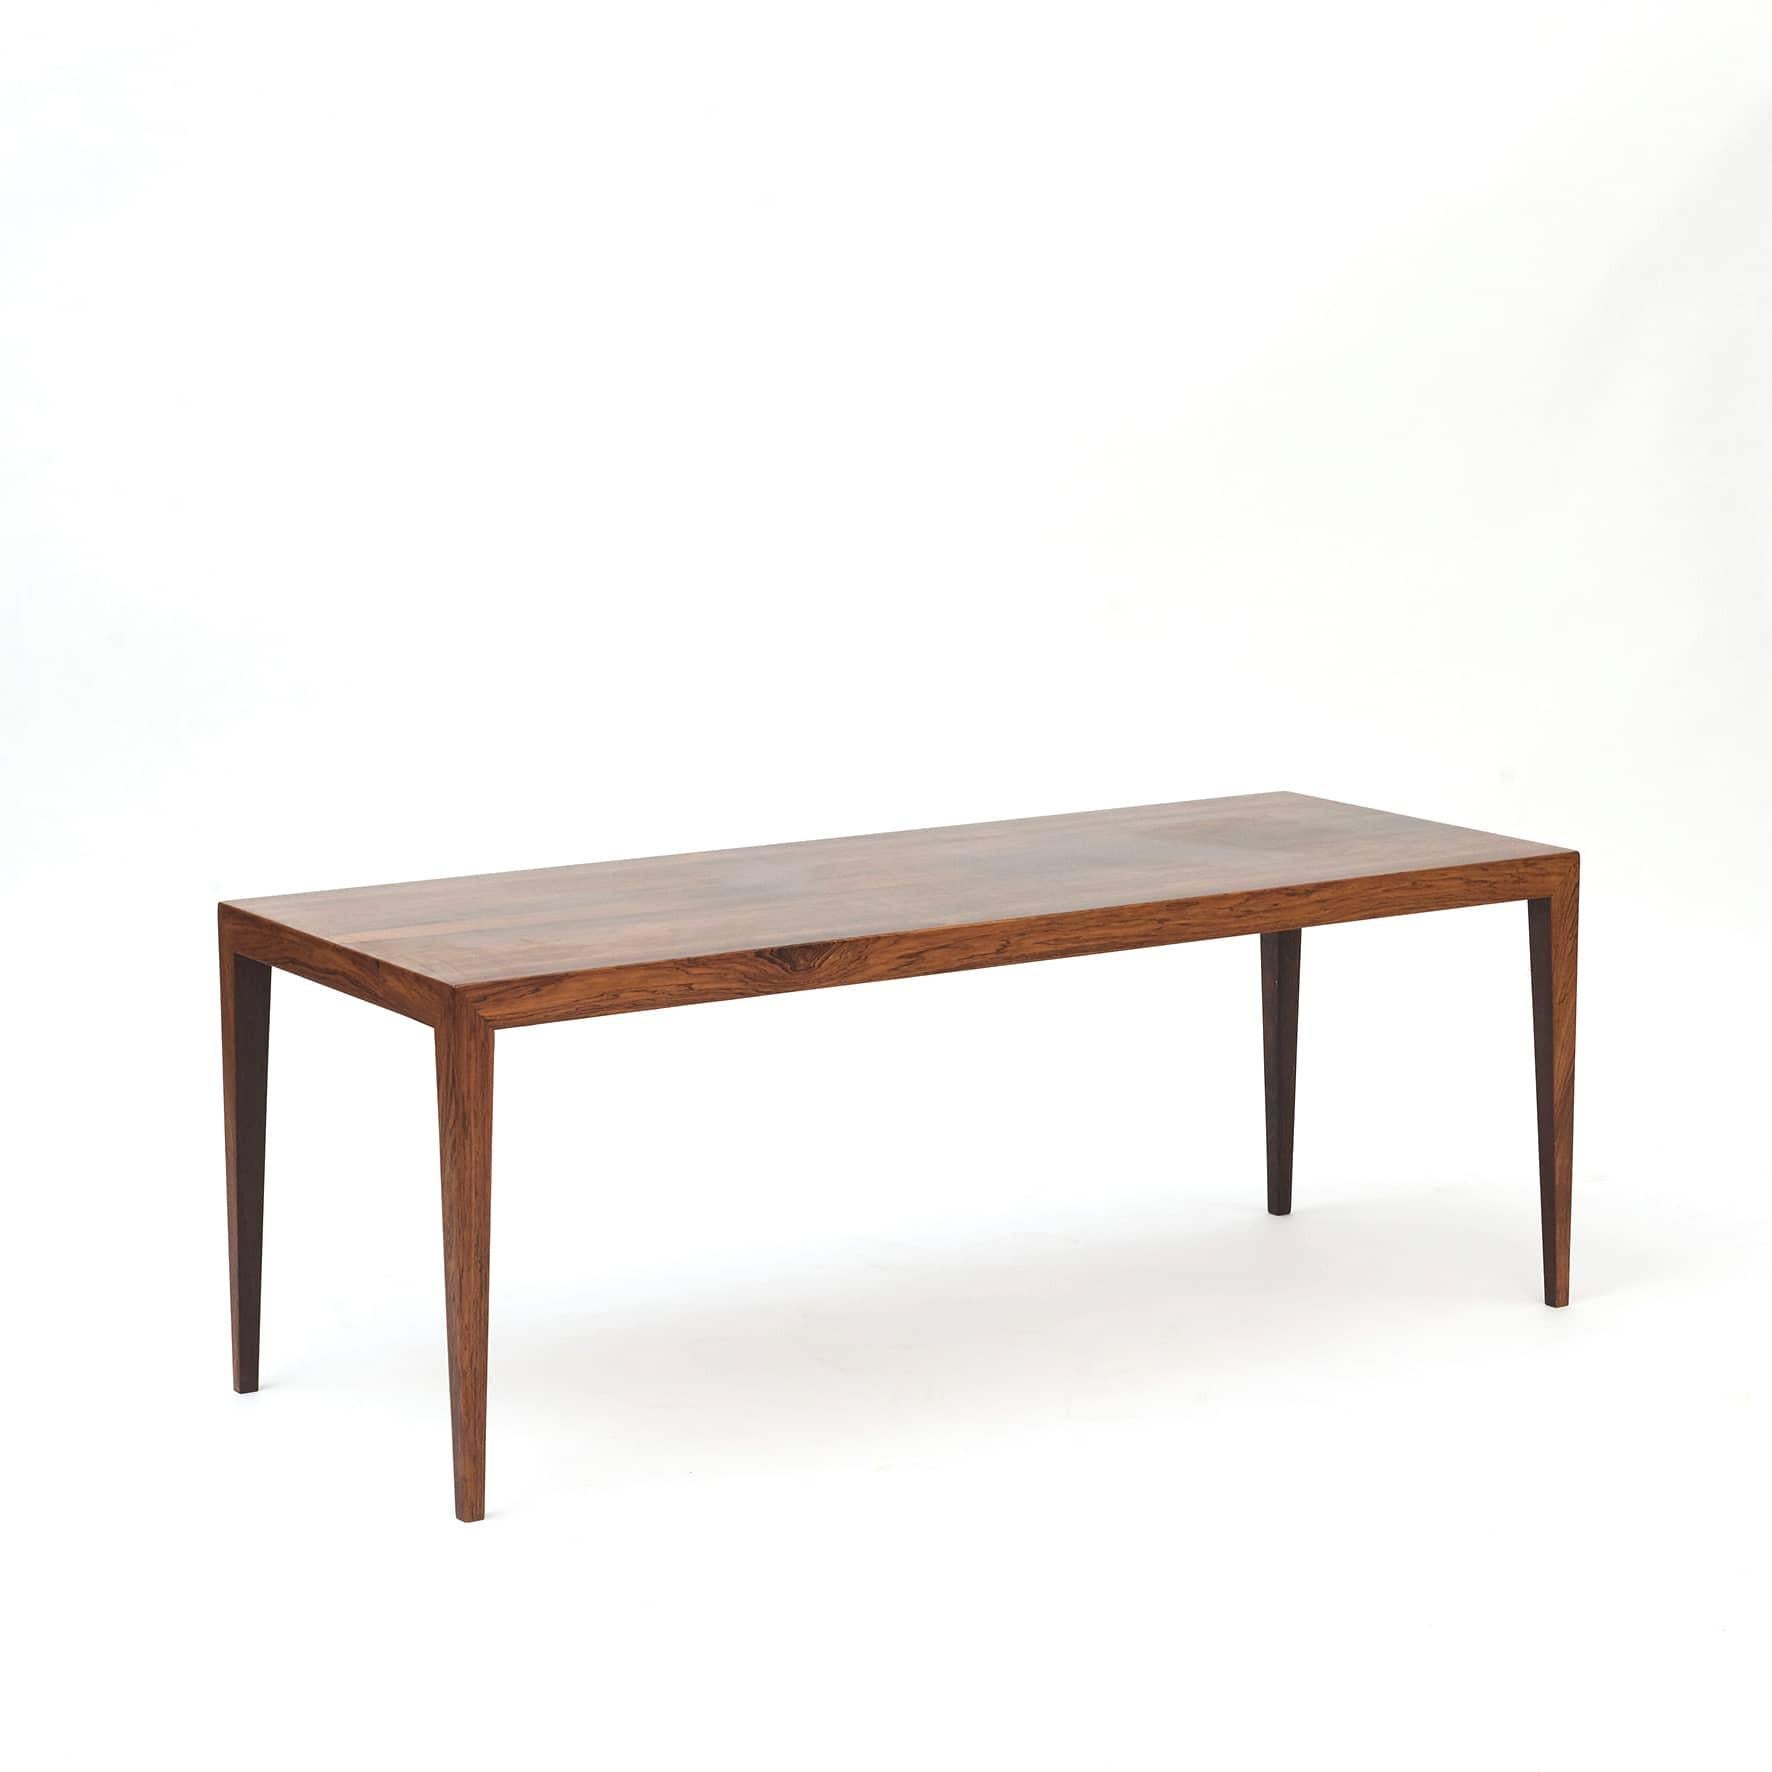 Rosewood coffee table by Severin Hansen for Haslev Mobelsnedkeri, Denmark, 1960s.

Original untouched and good condition.
 